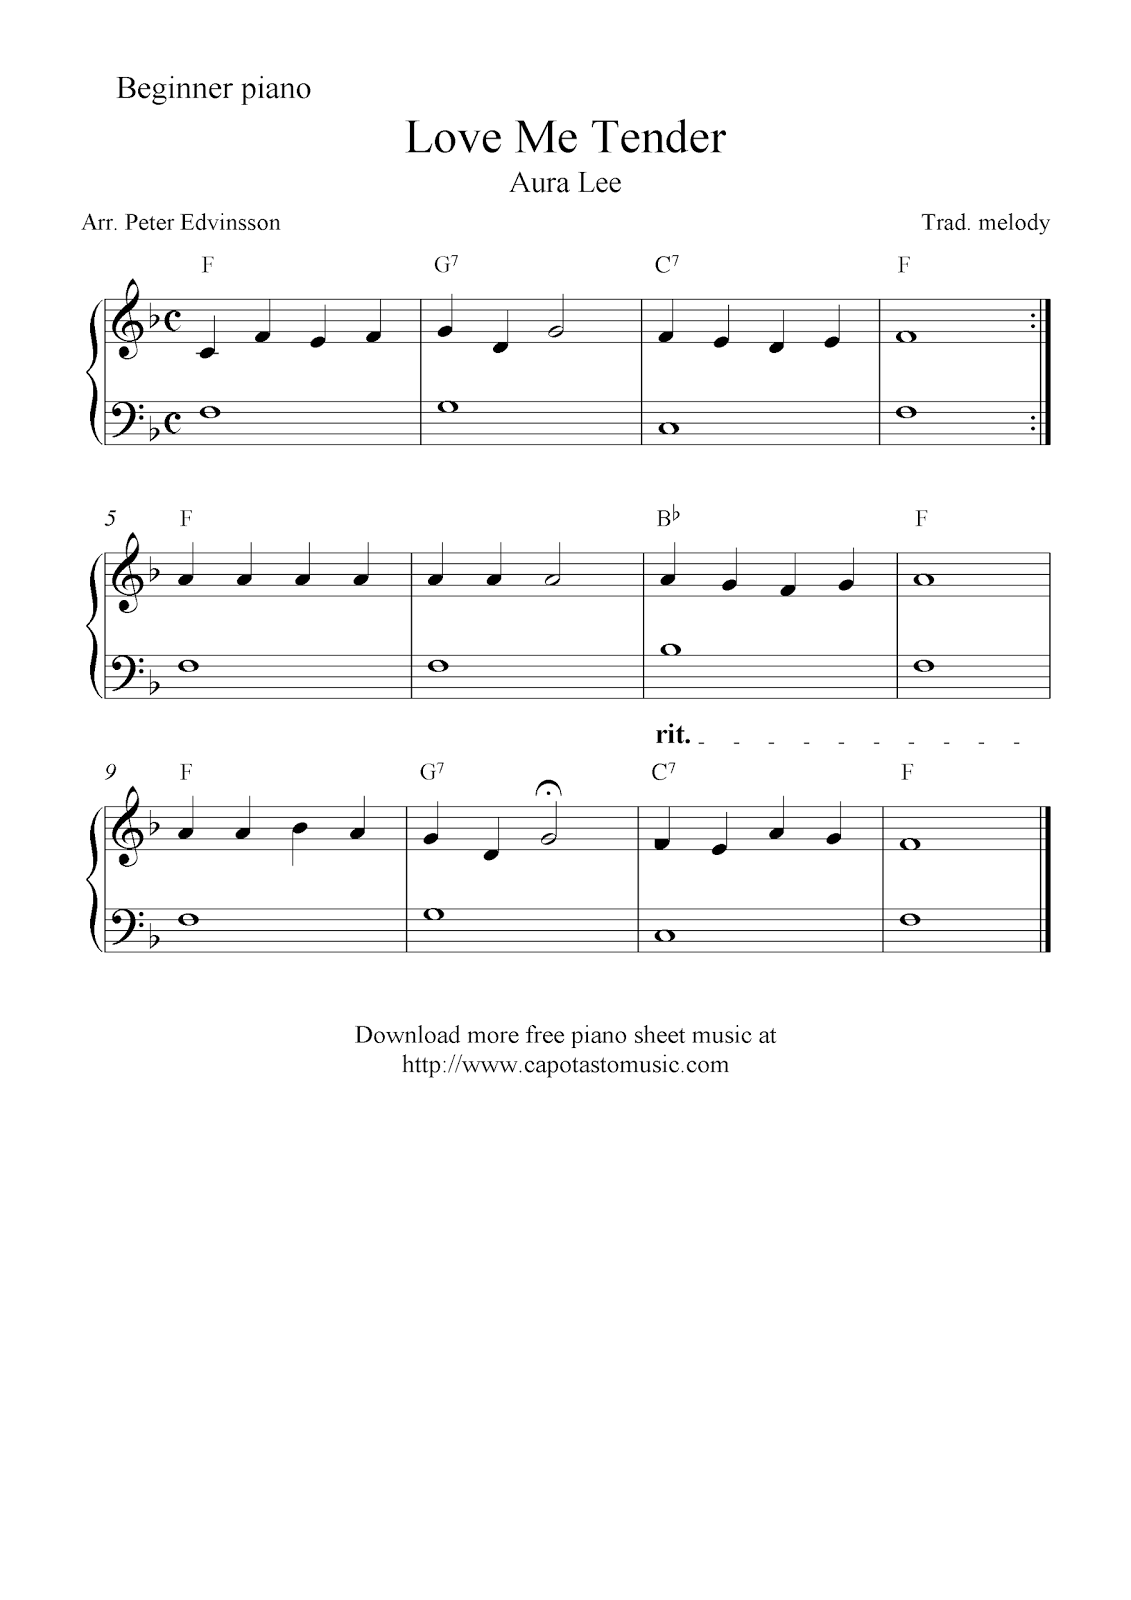 Best Free Printable Piano Sheet Music for Beginners With Letters | Roy Blog